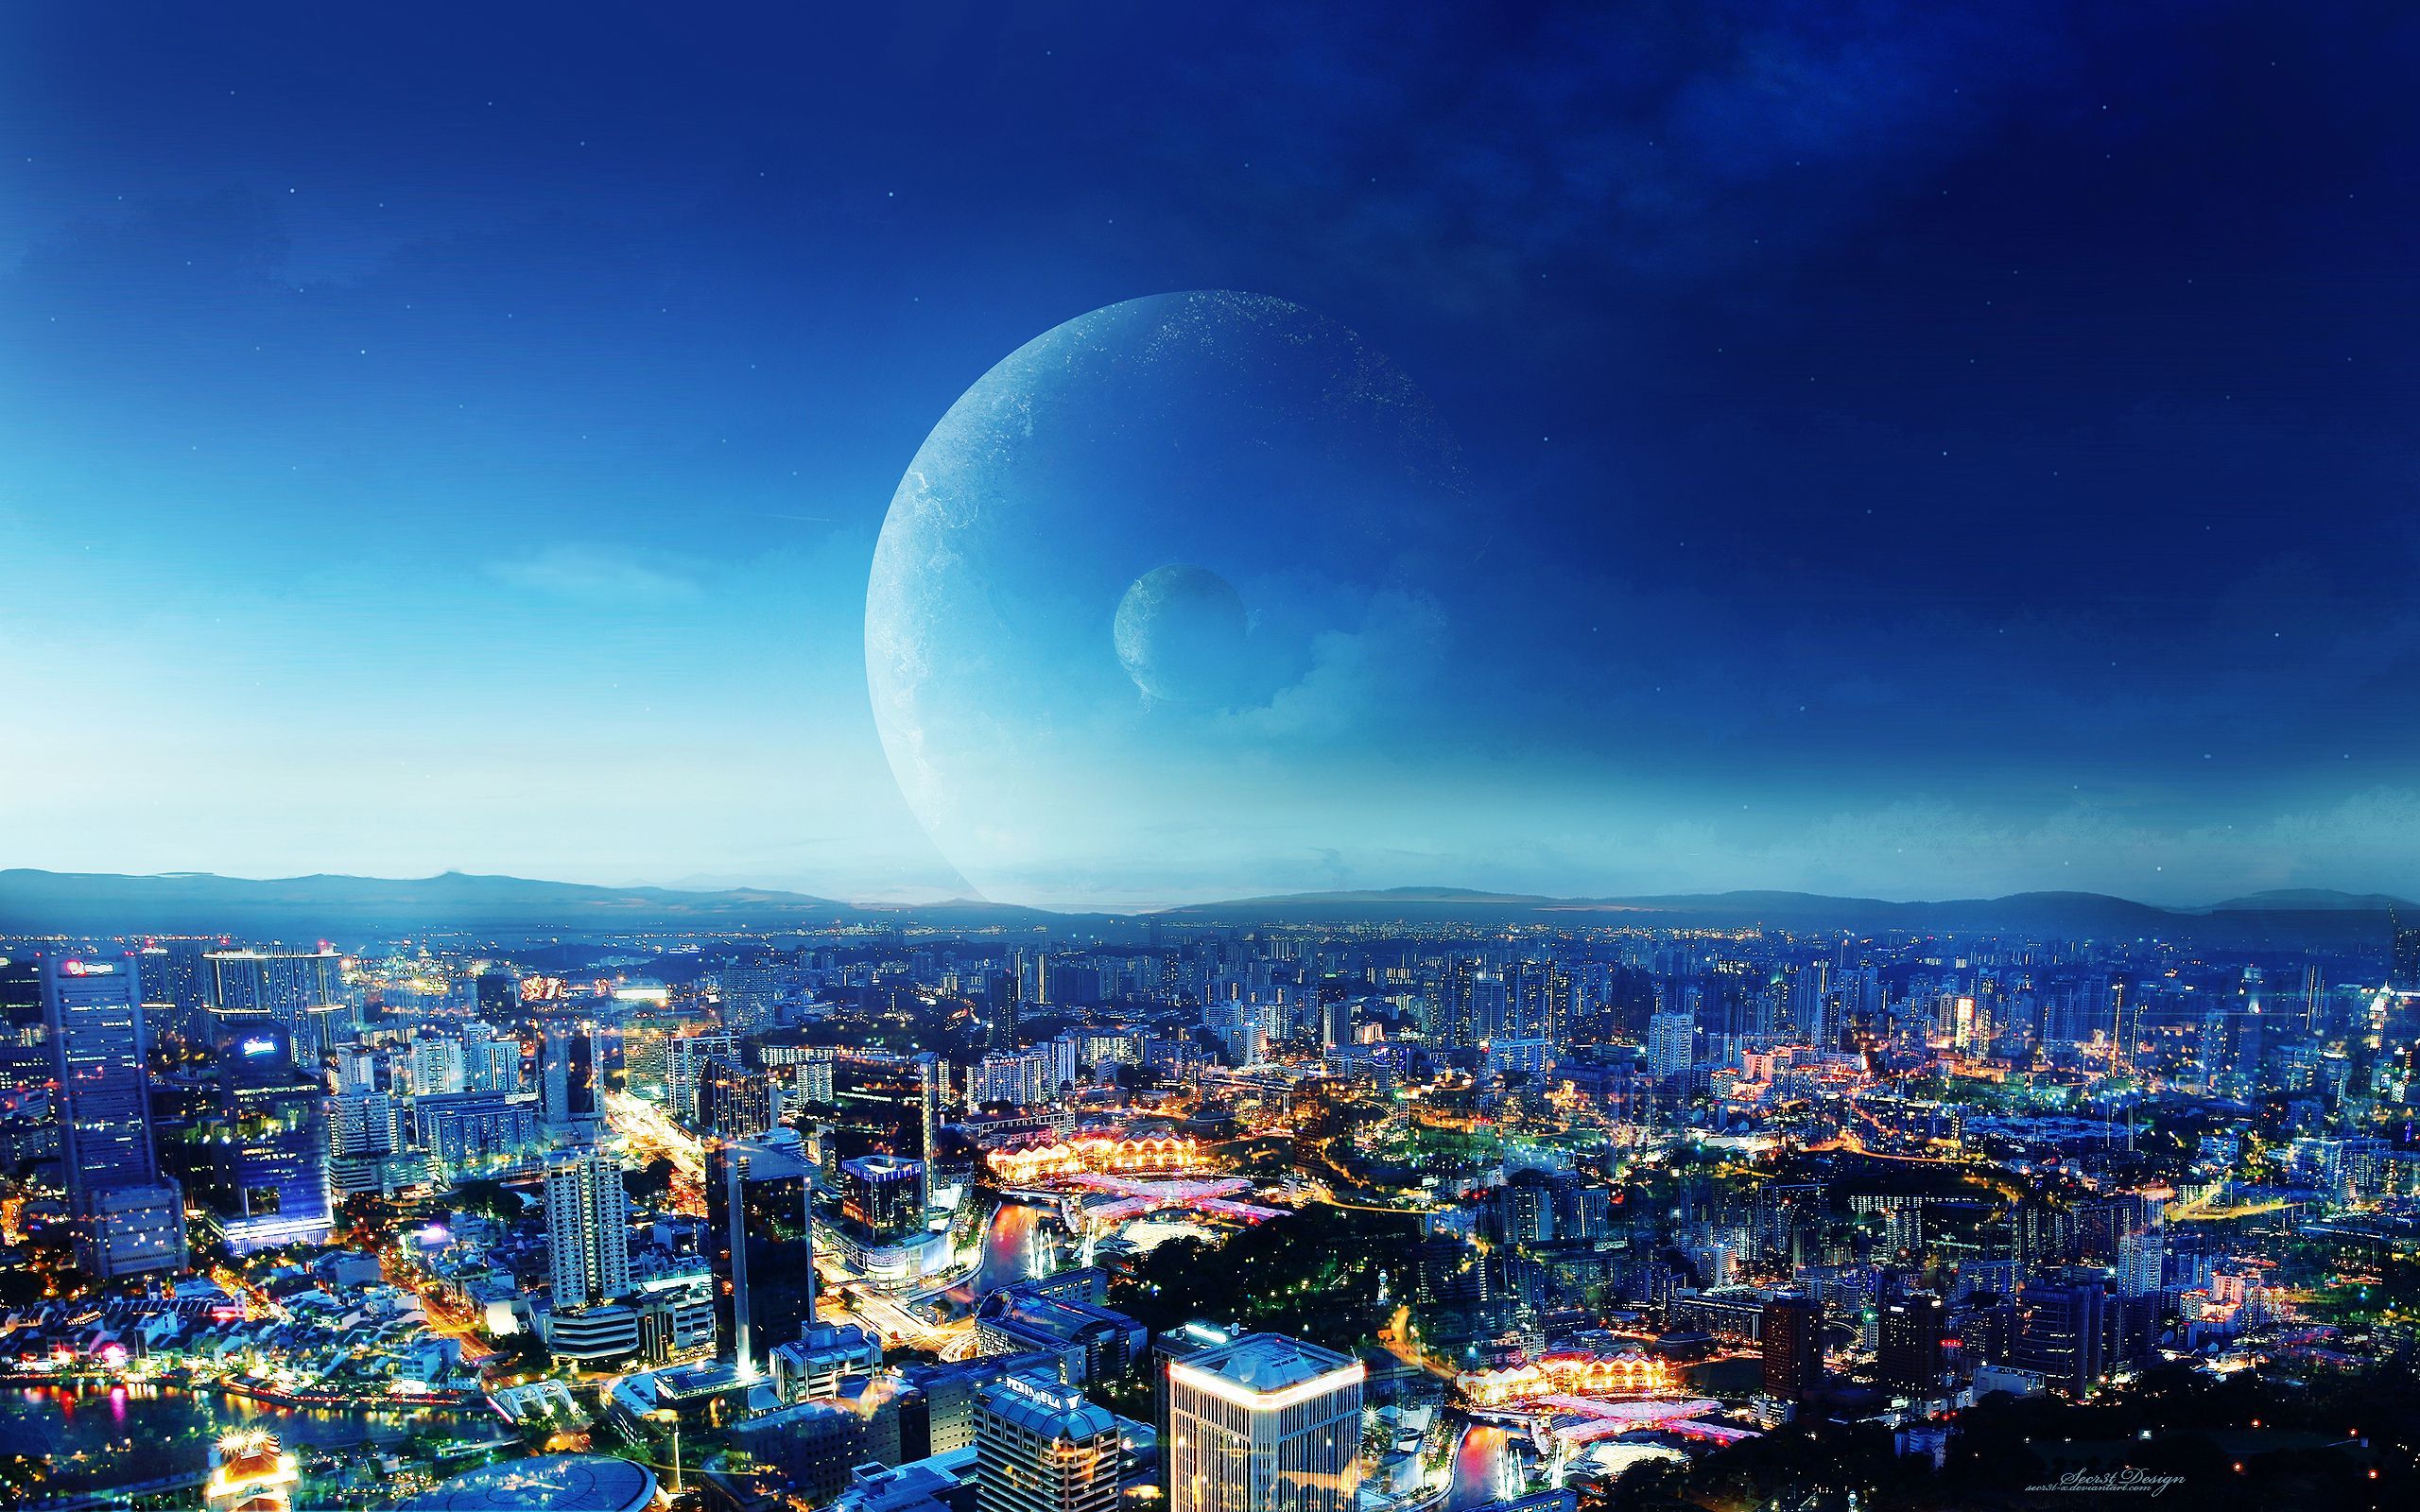 CIty Night Fantasy Wallpapers | HD Wallpapers